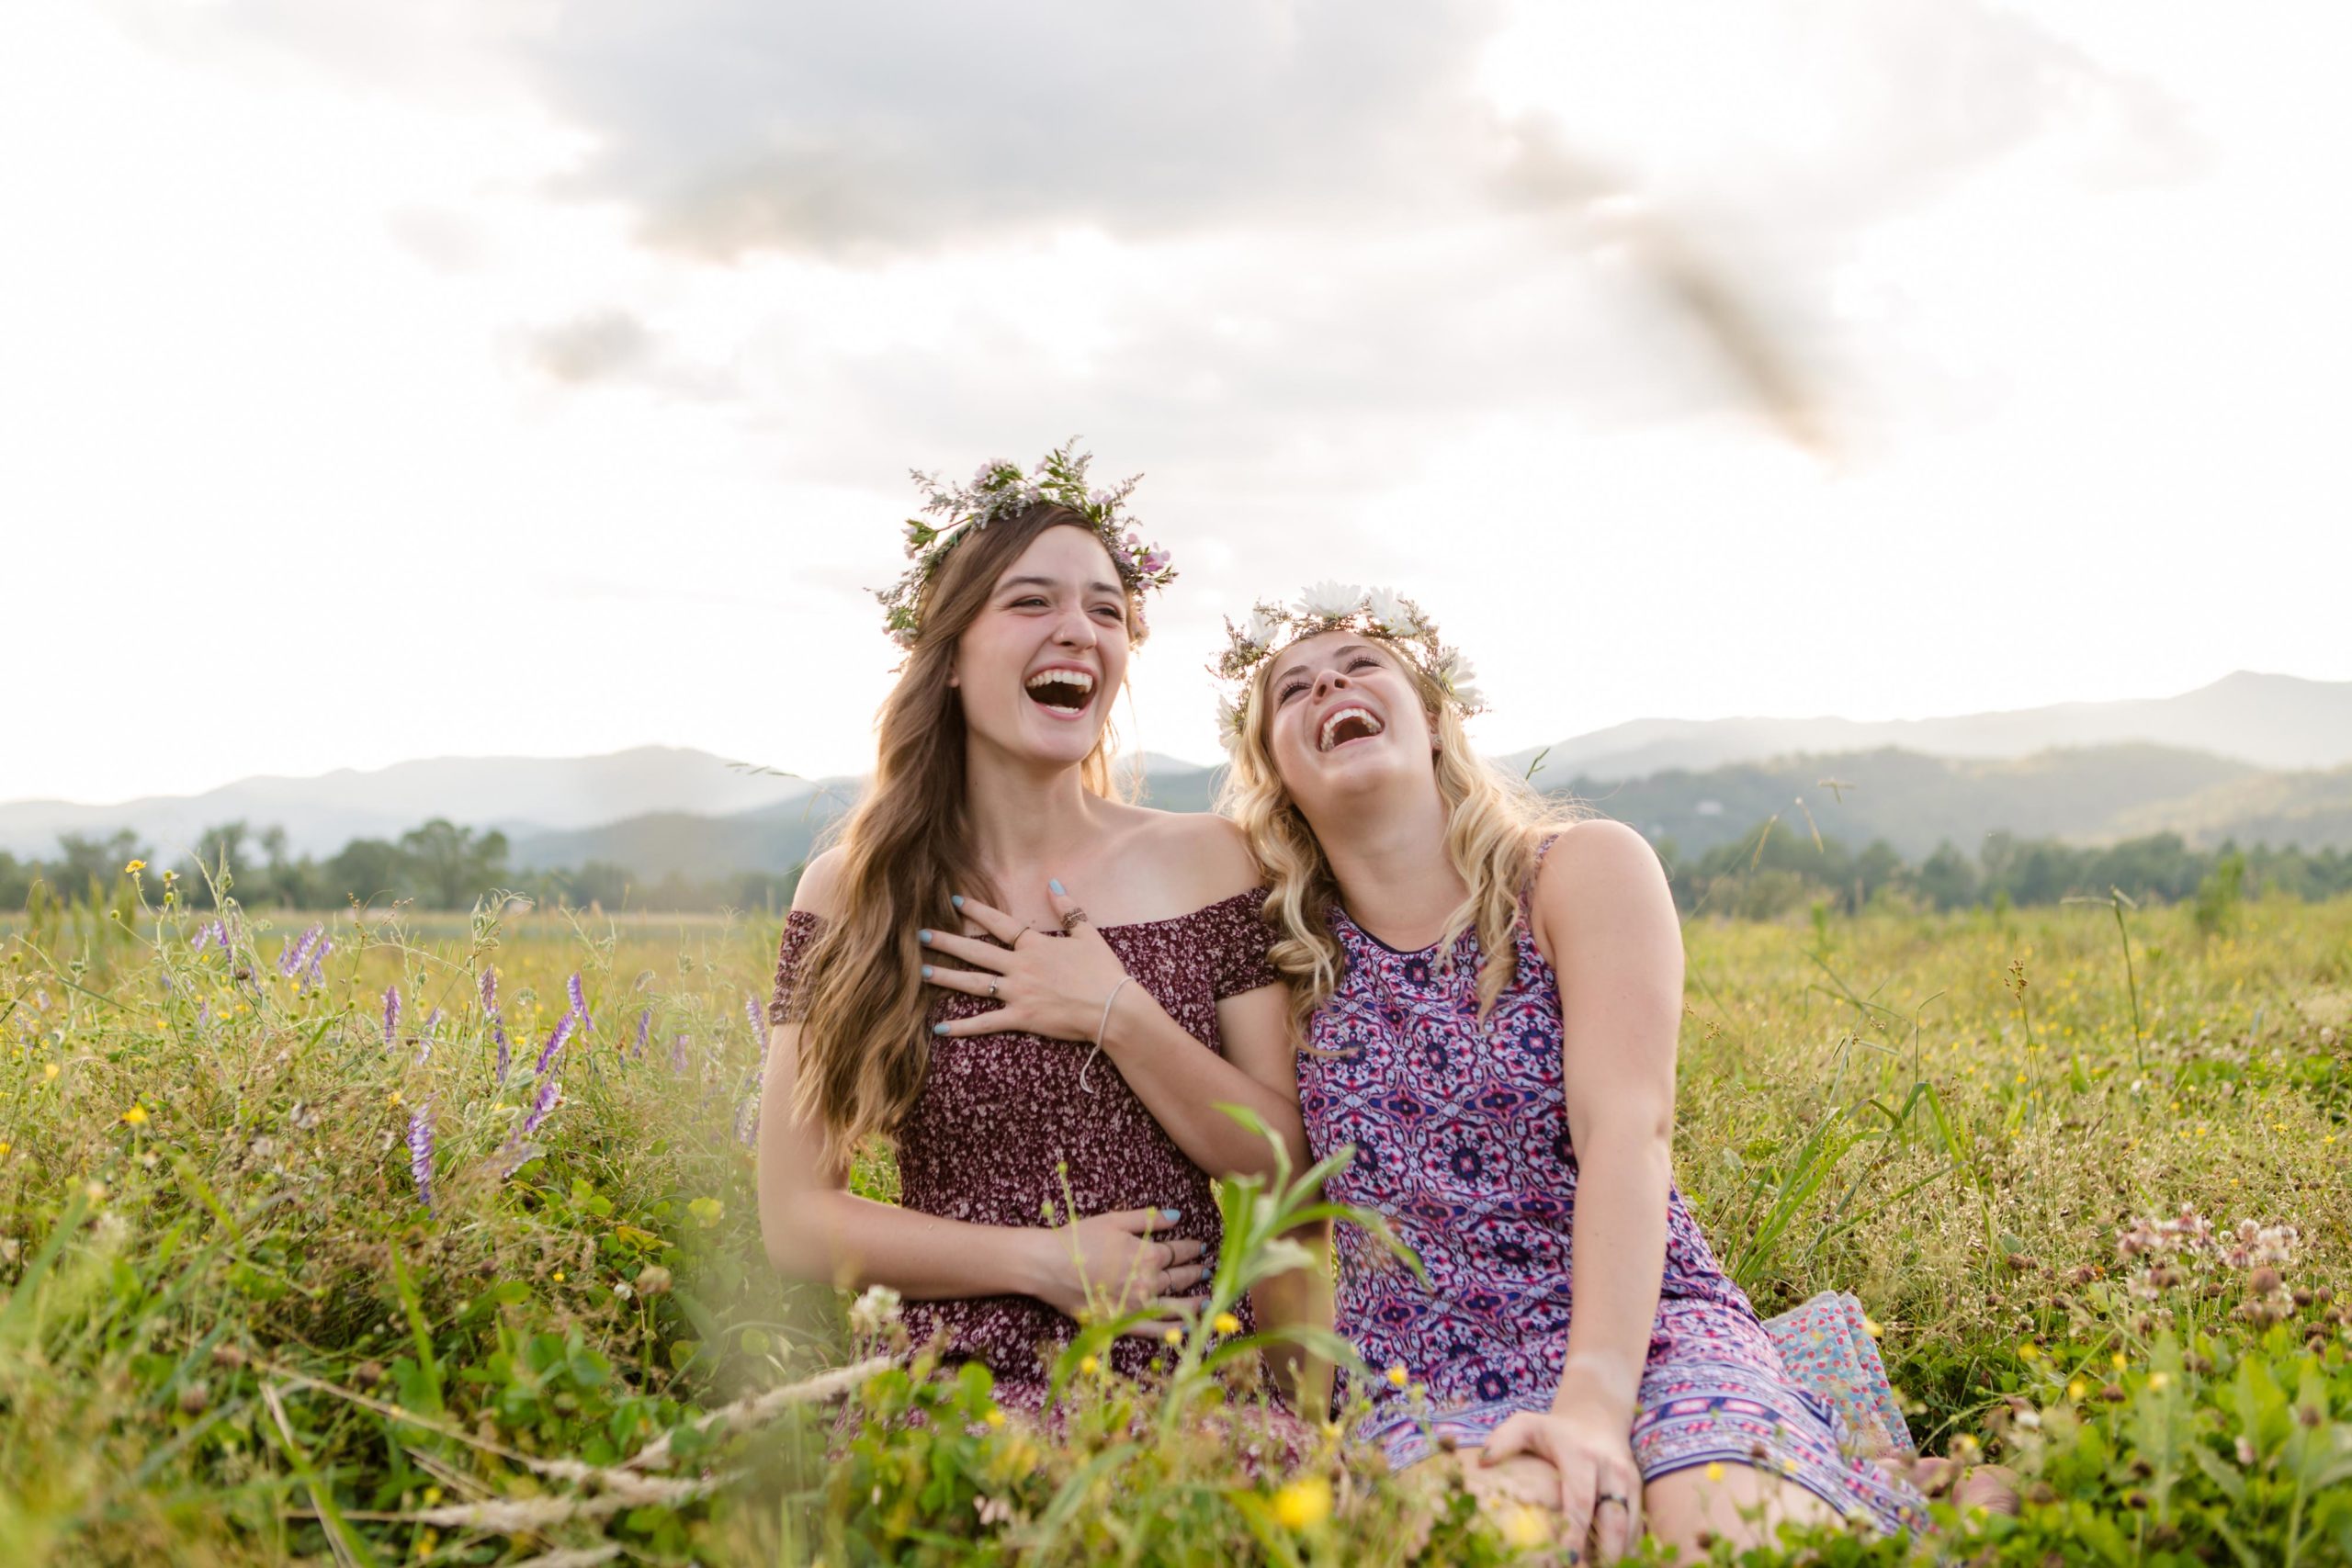 Best Friend Senior Session Kilby and Neva laughing in field Photo